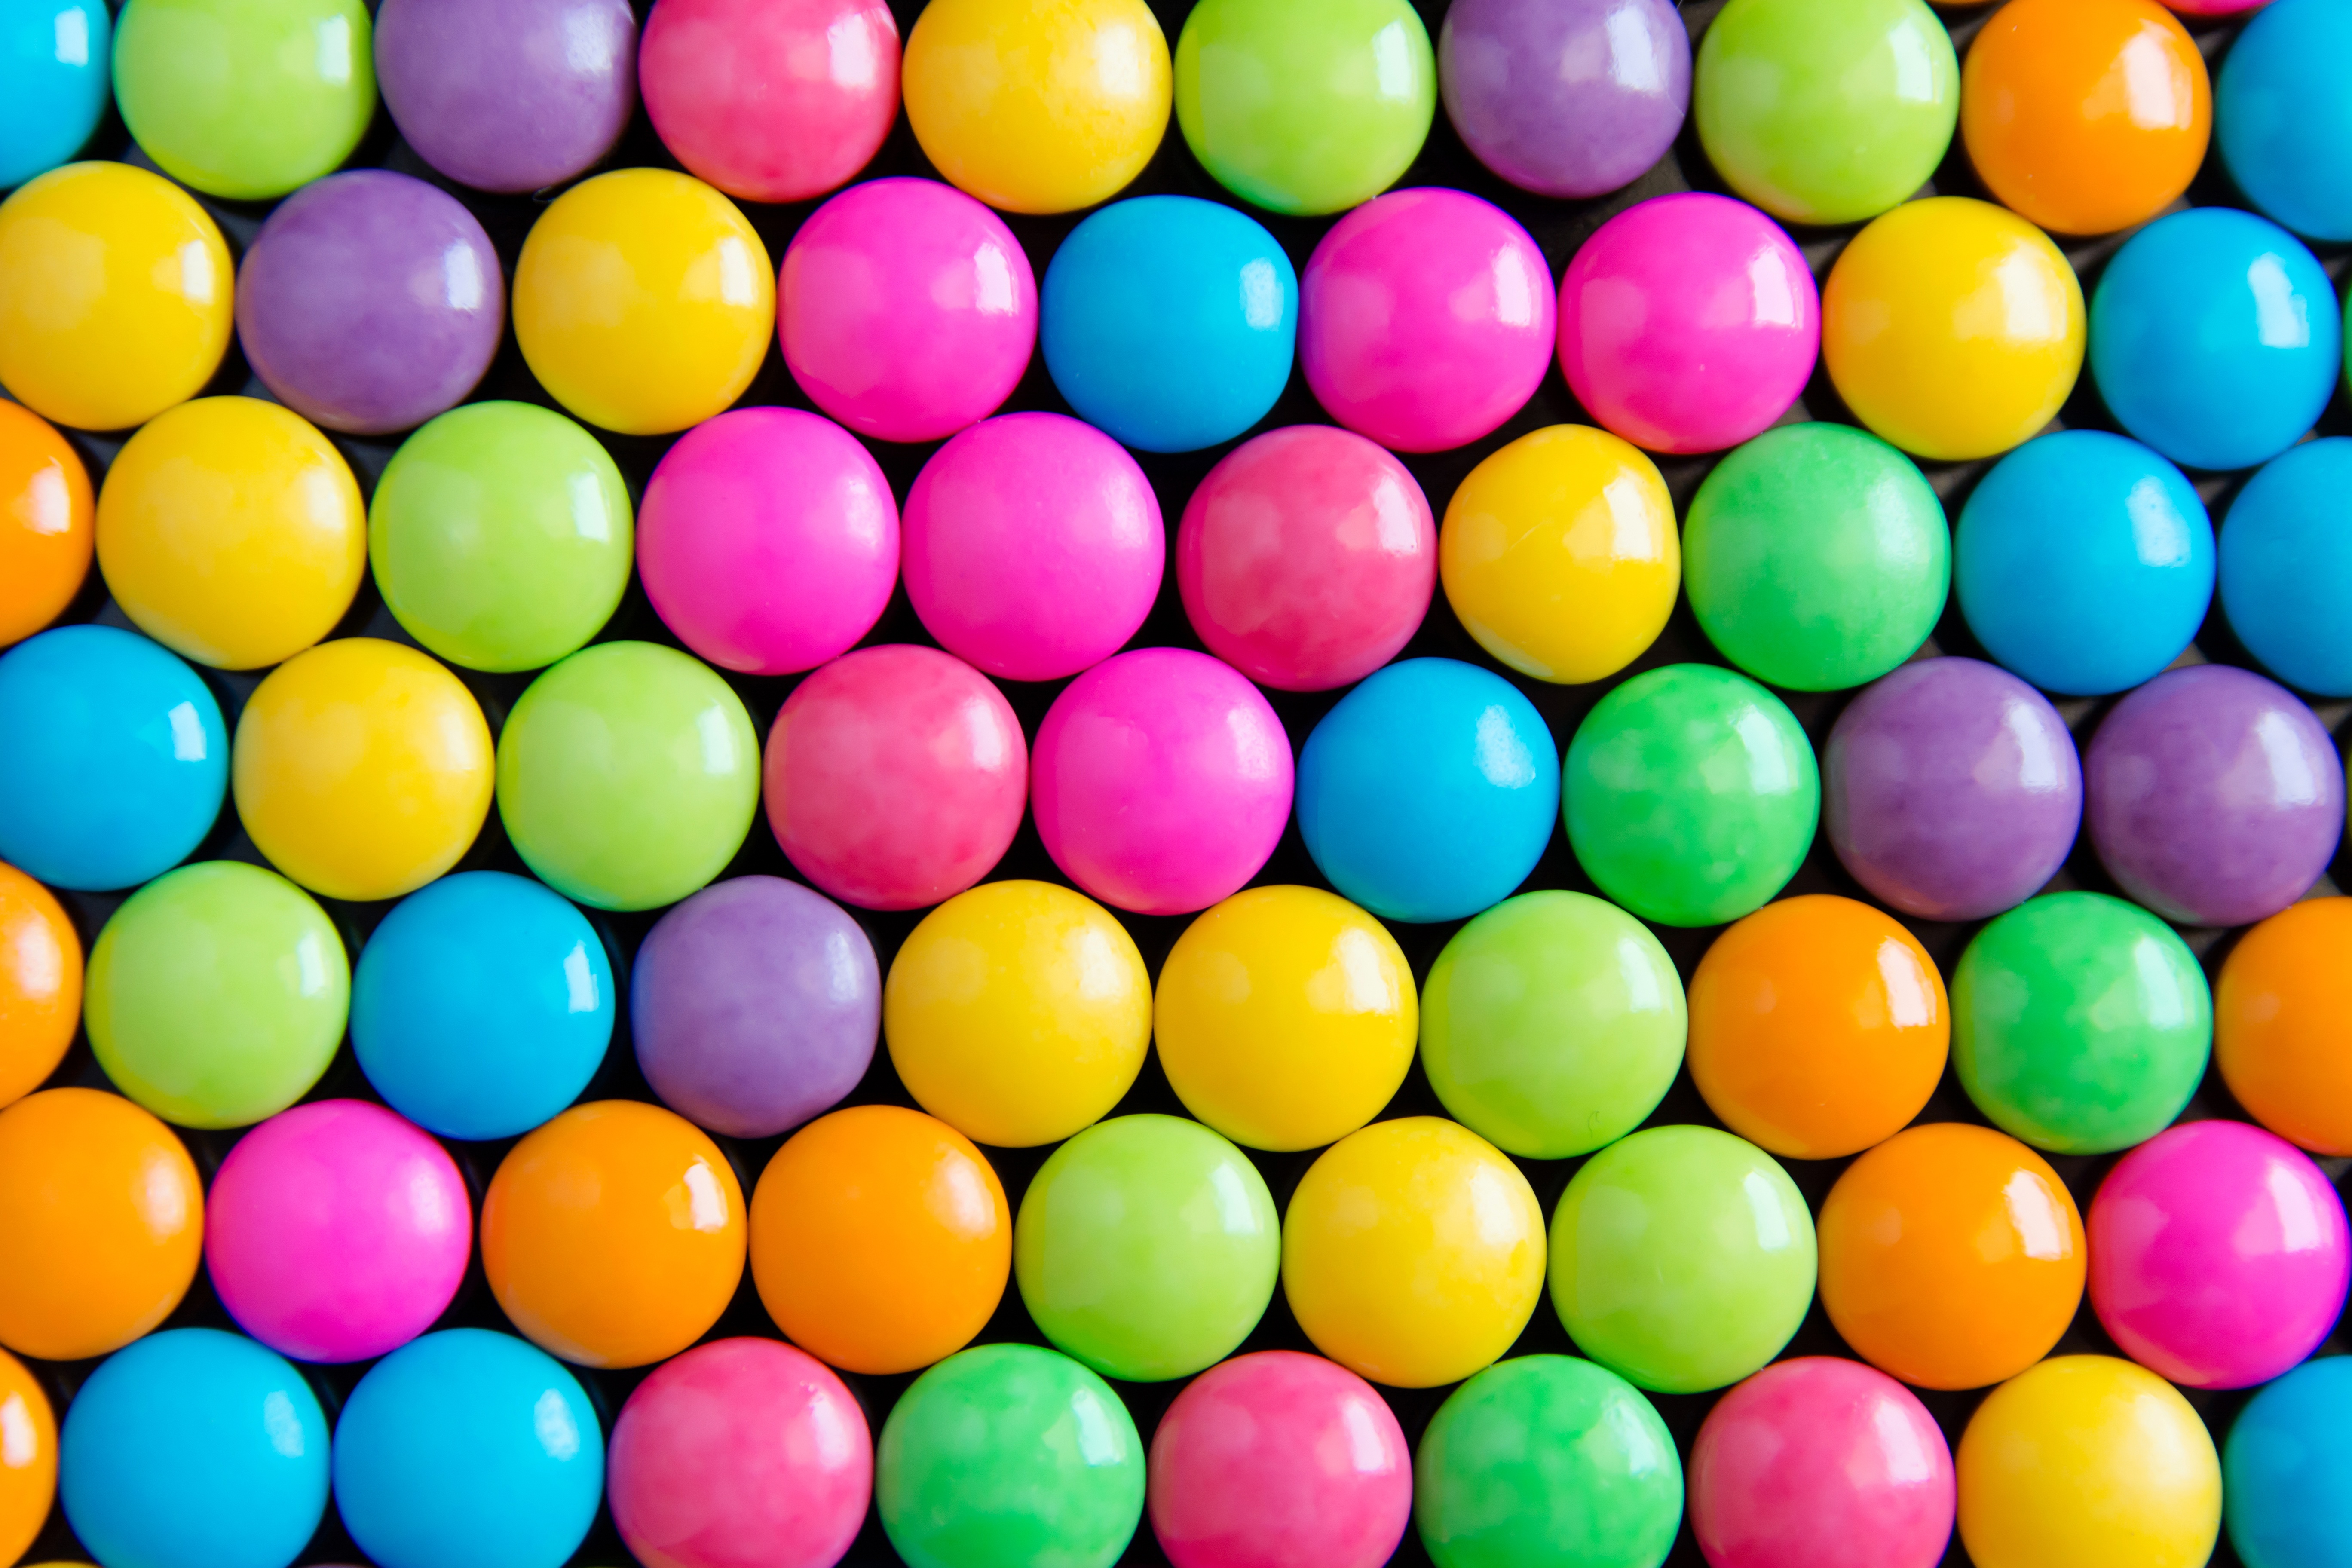 Abstract Colorful Colors Smarties 5472x3648